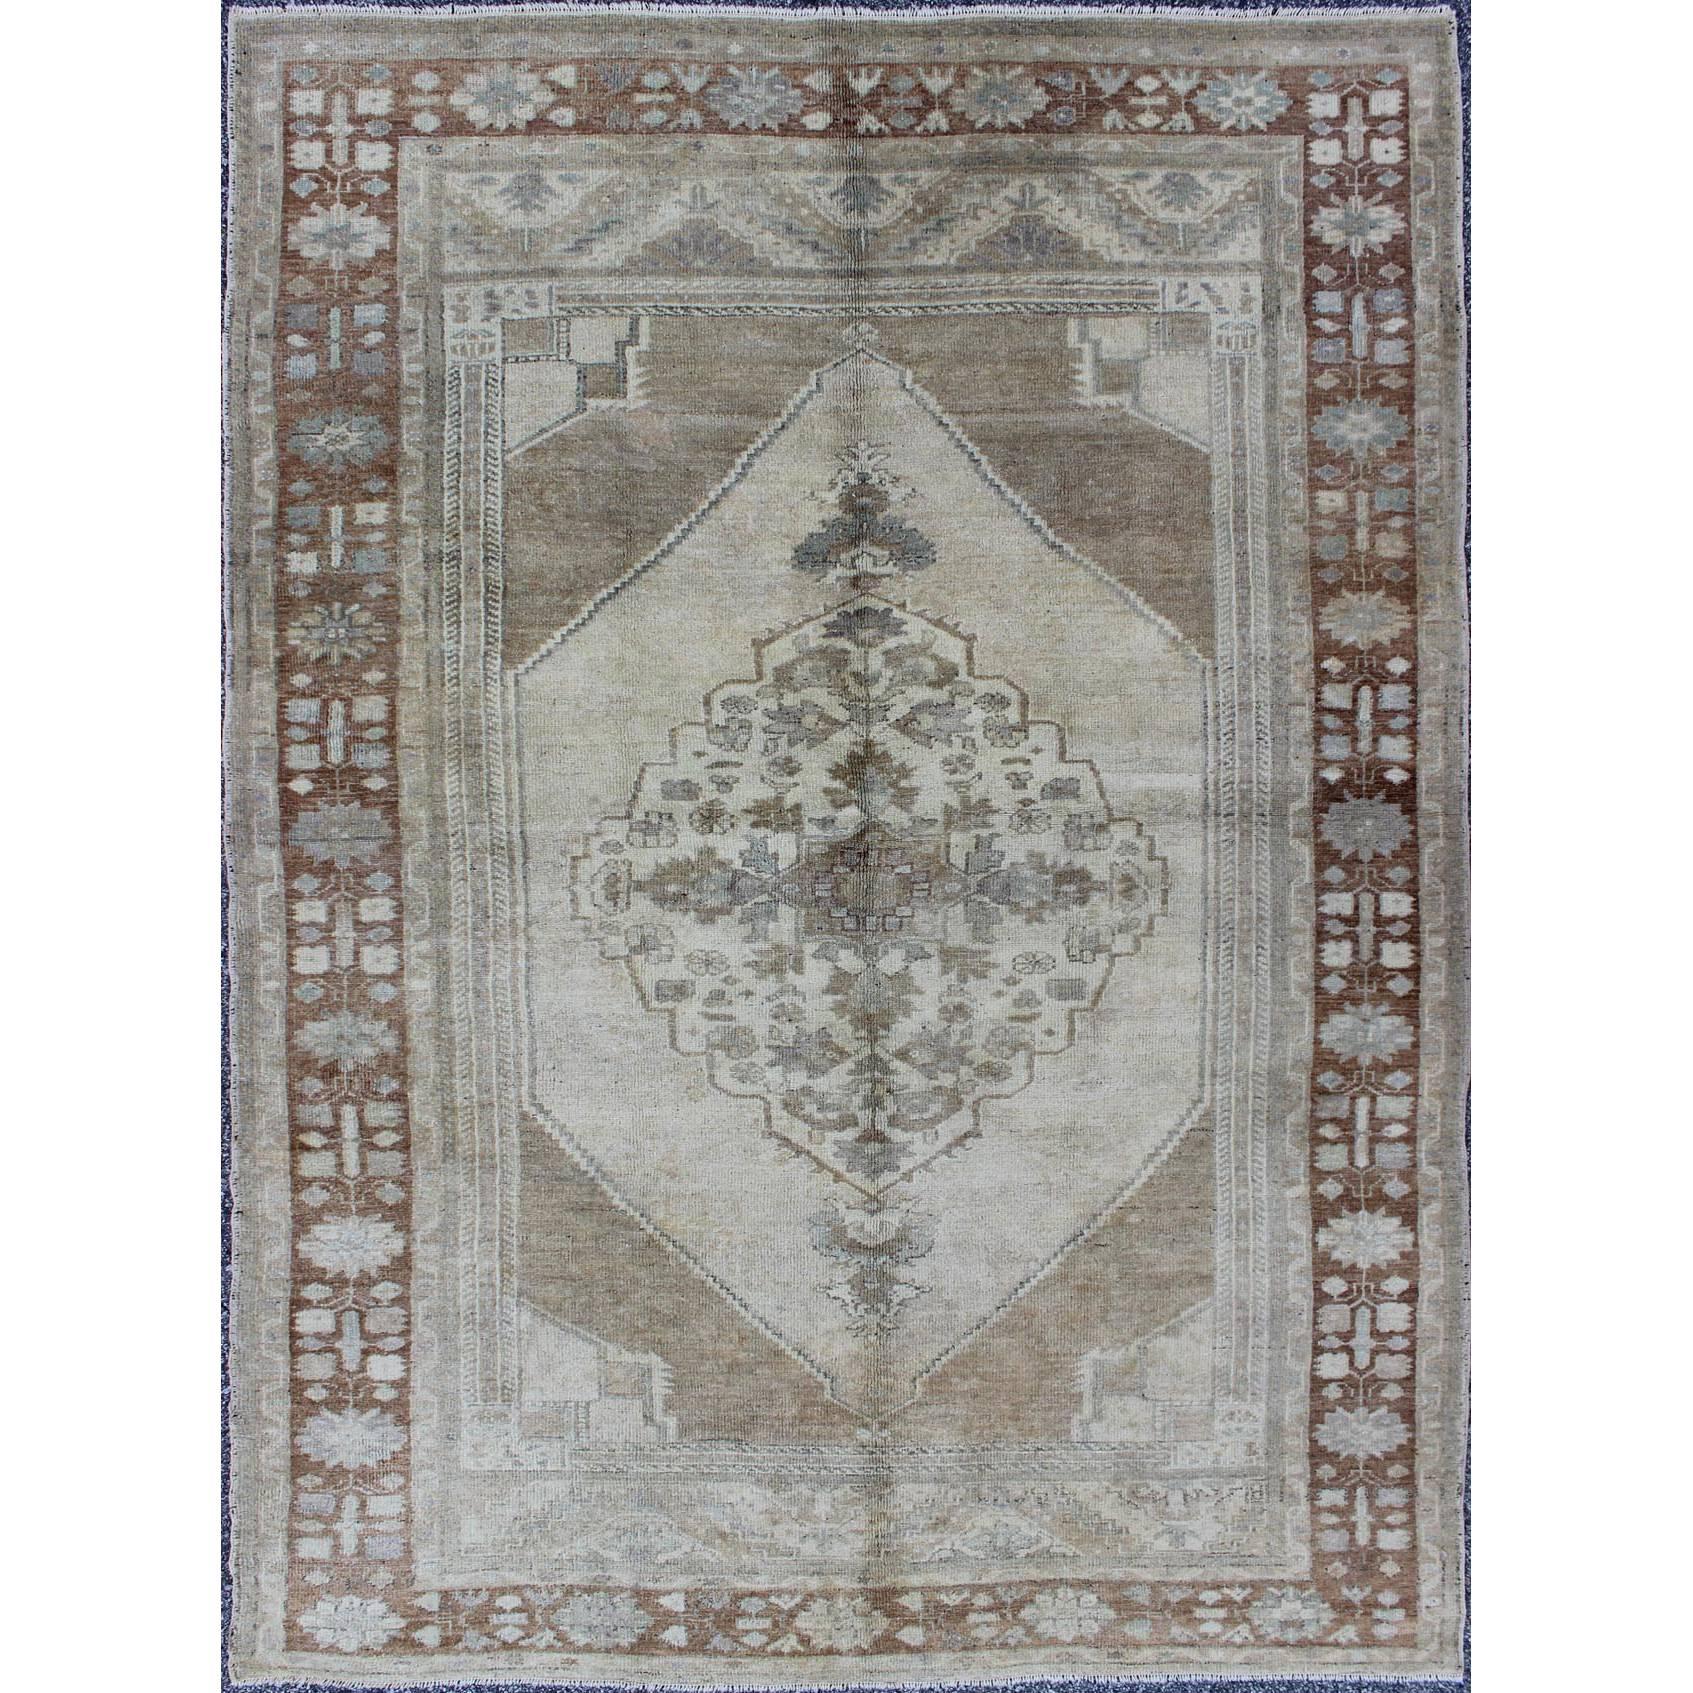 Vintage Turkish Oushak Rug with Layered Floral Medallion in Ivory, Gray, Brown